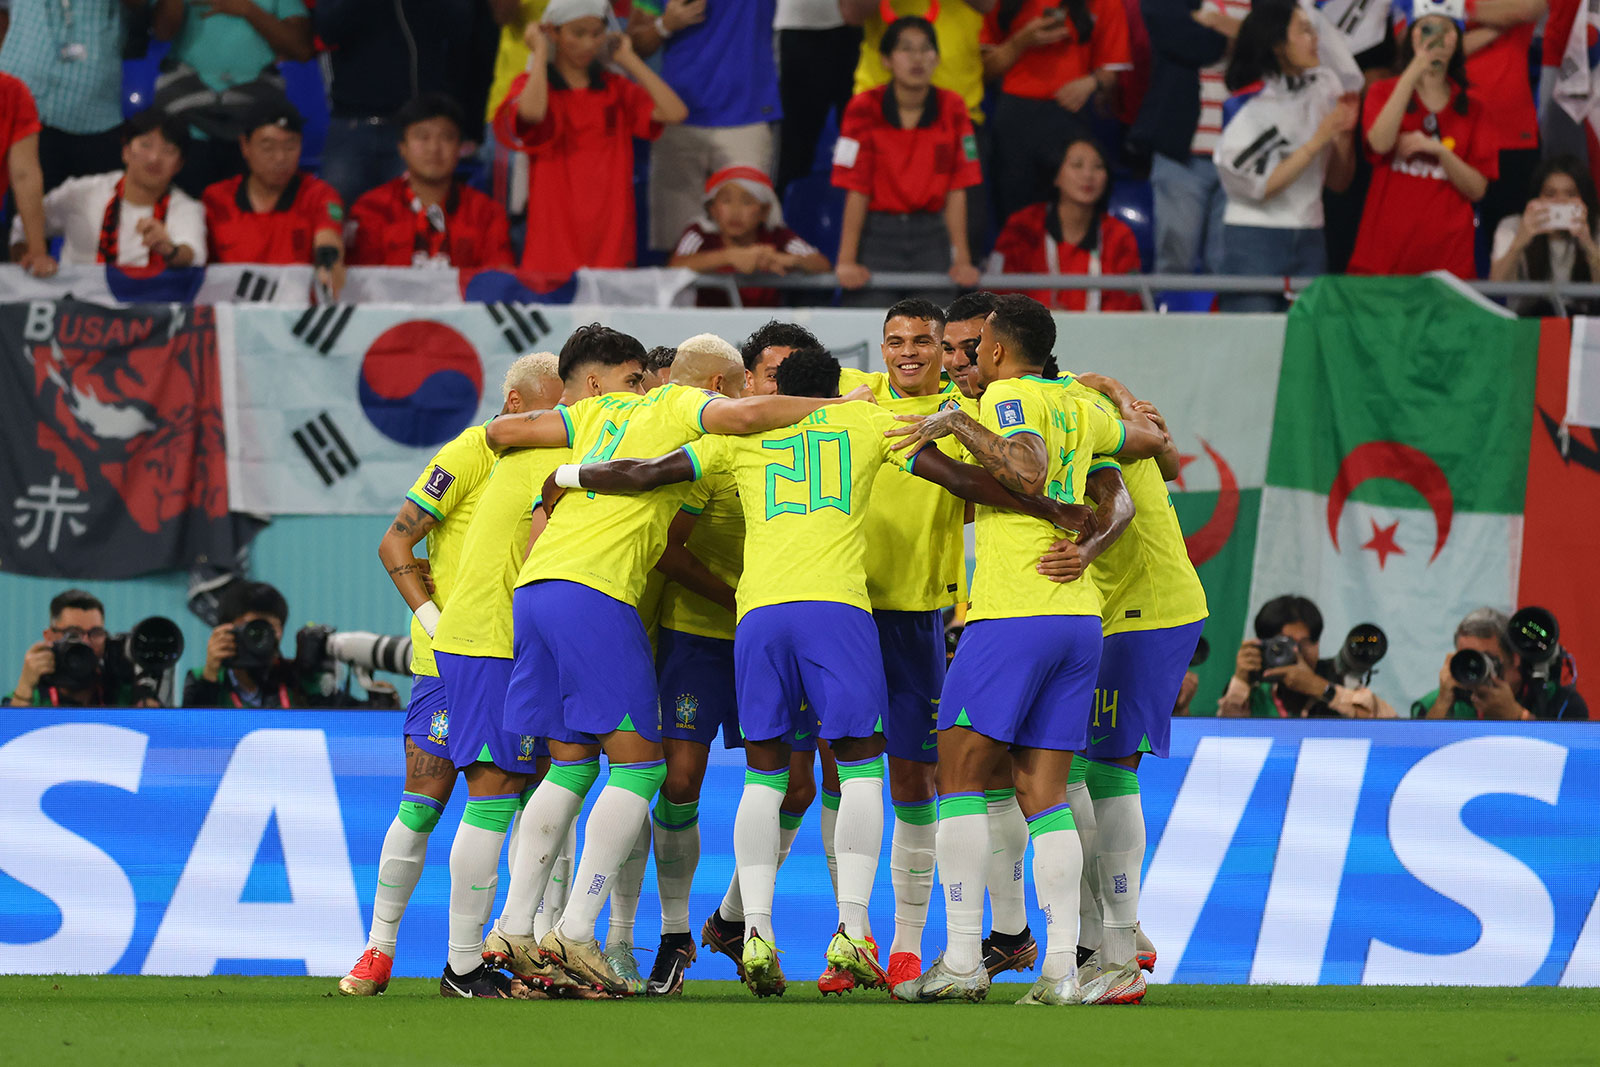 Brazil players dance in celebration after scoring a goal in their round of 16 match against South Korea.